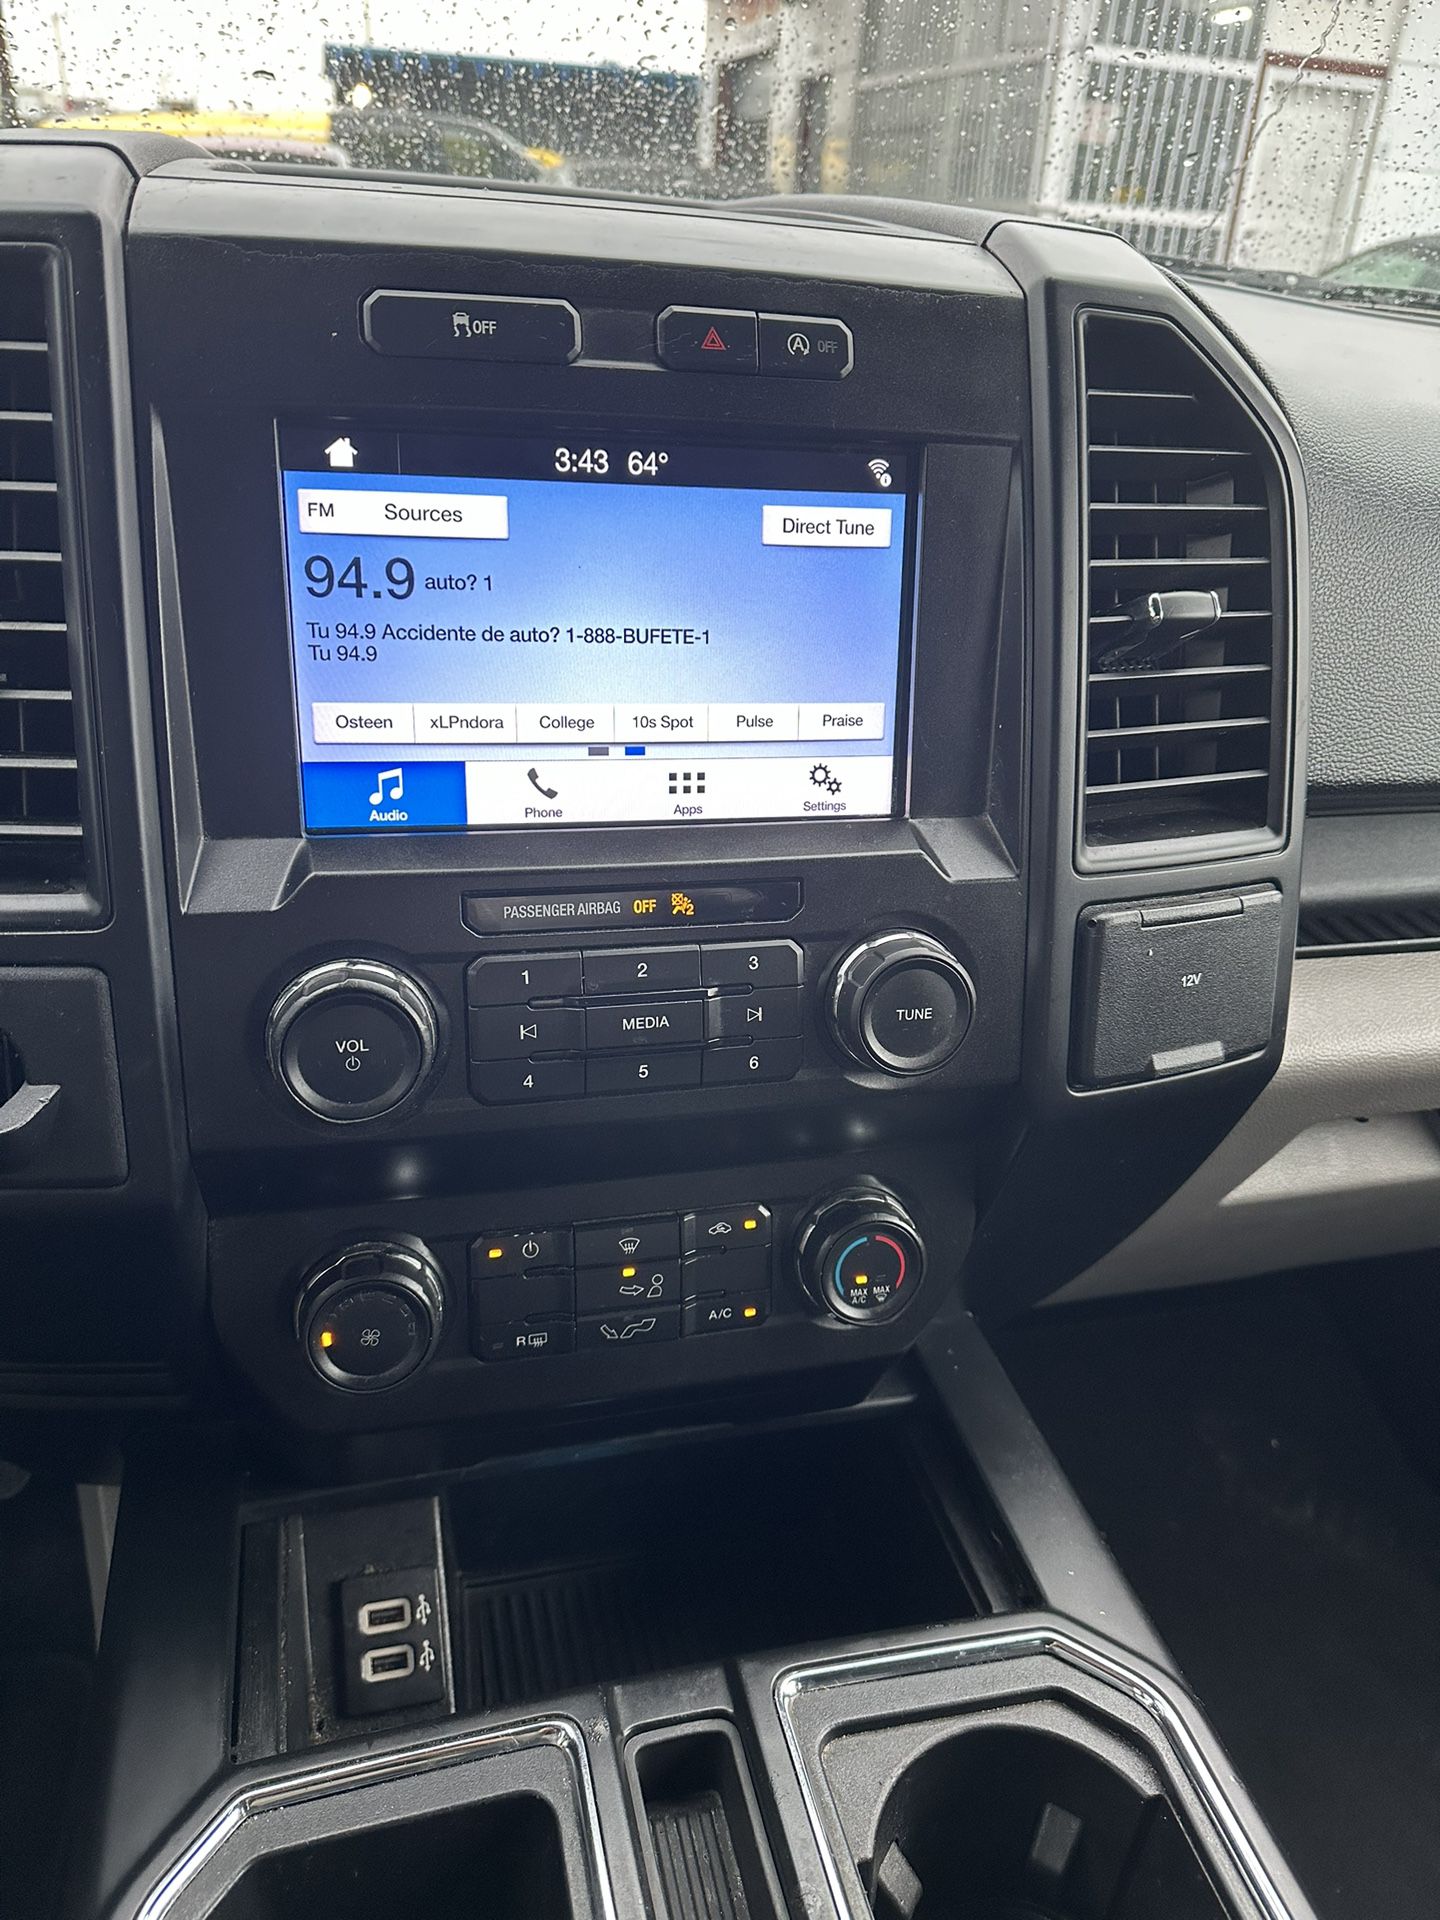 used 2019 ford f150 - interior view 2